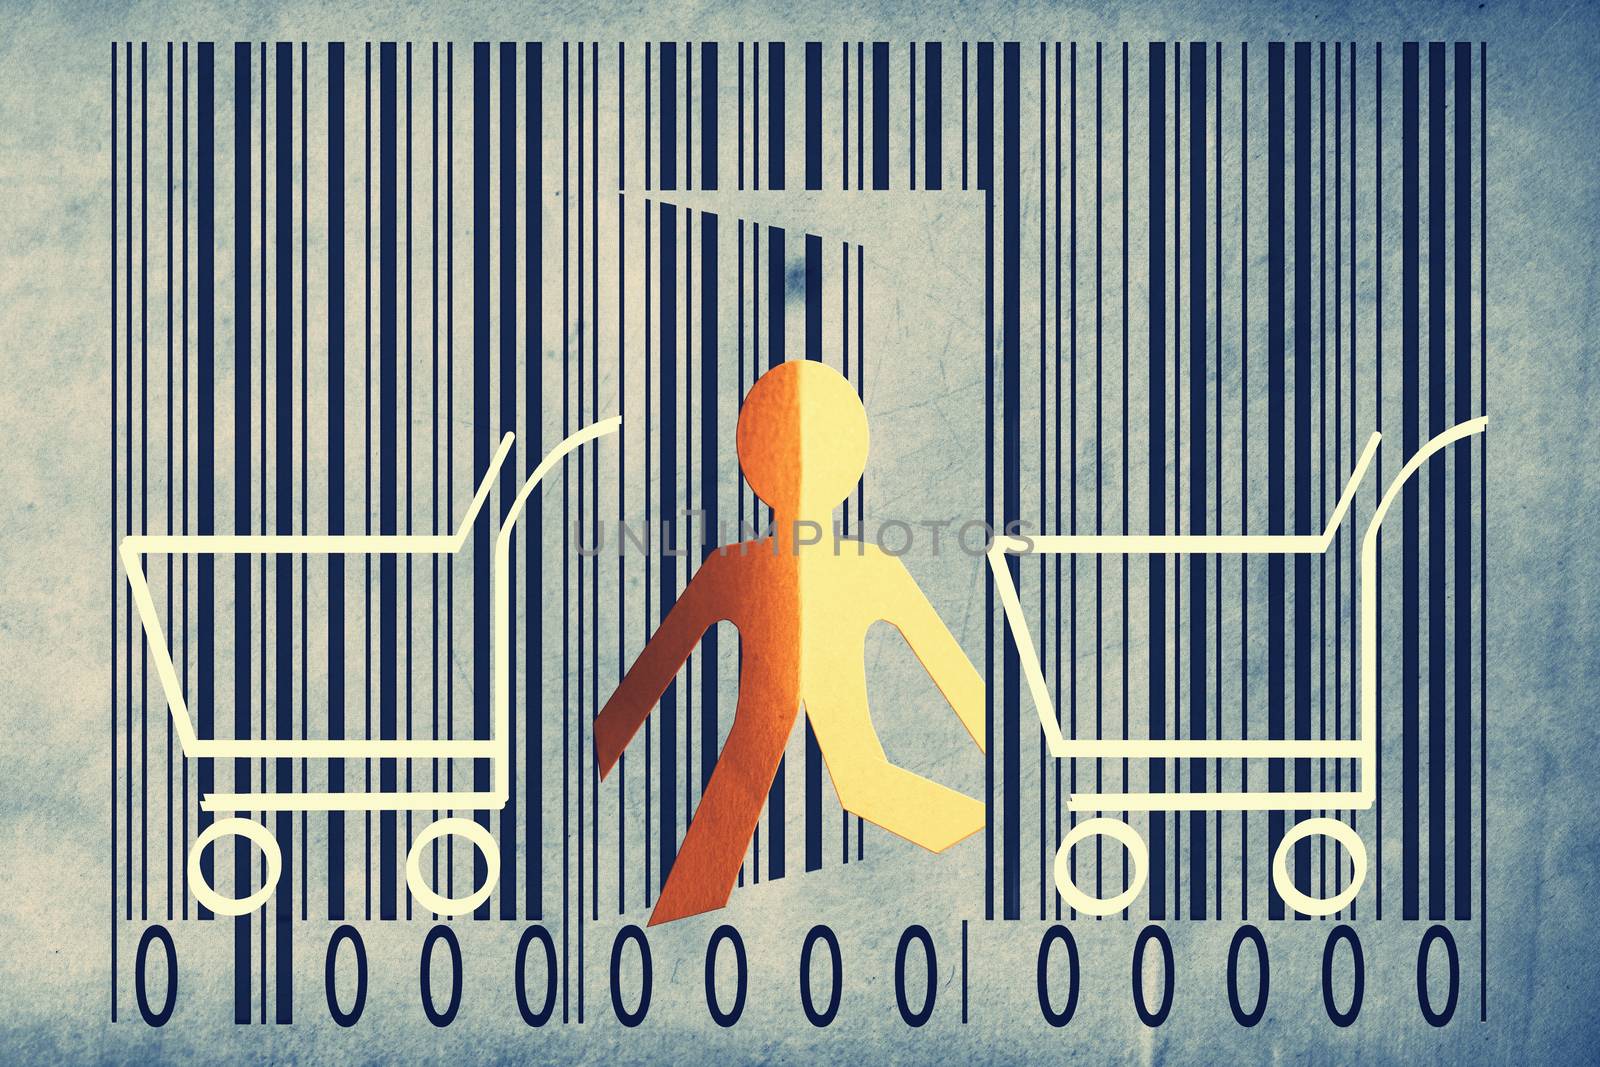 Paperman coming out of a bar code with shopping cart symbol by yands